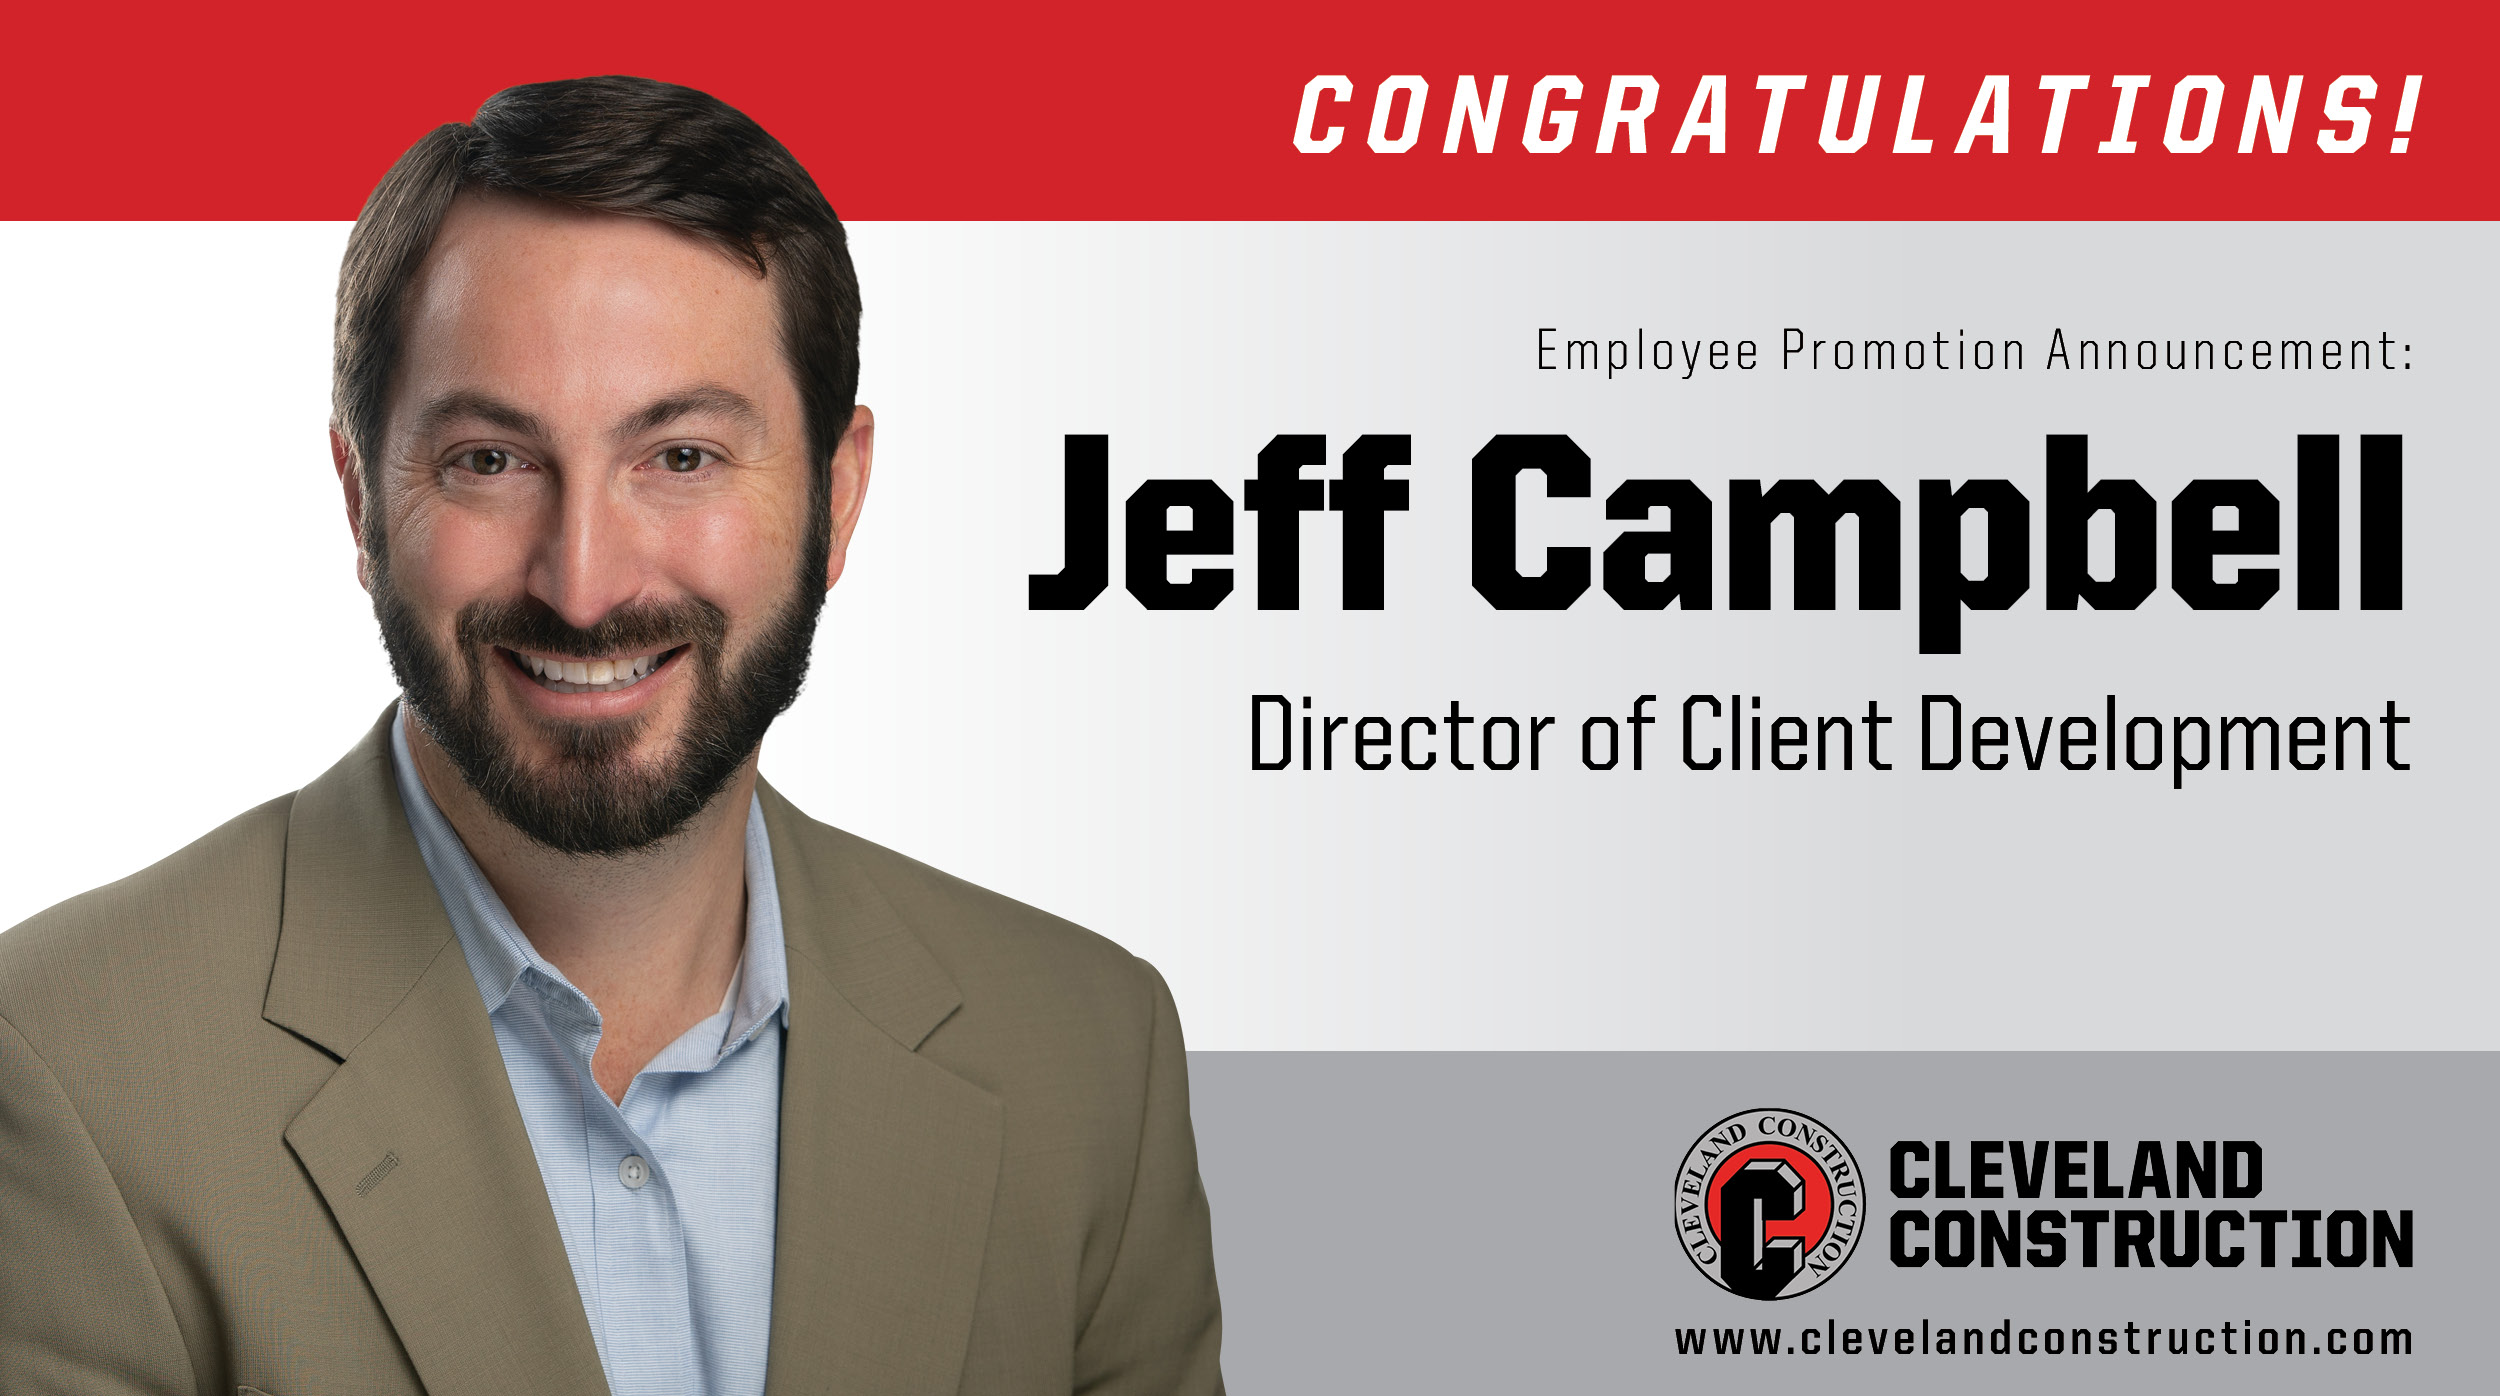 Jeff Campbell Promoted to Director of Client Development